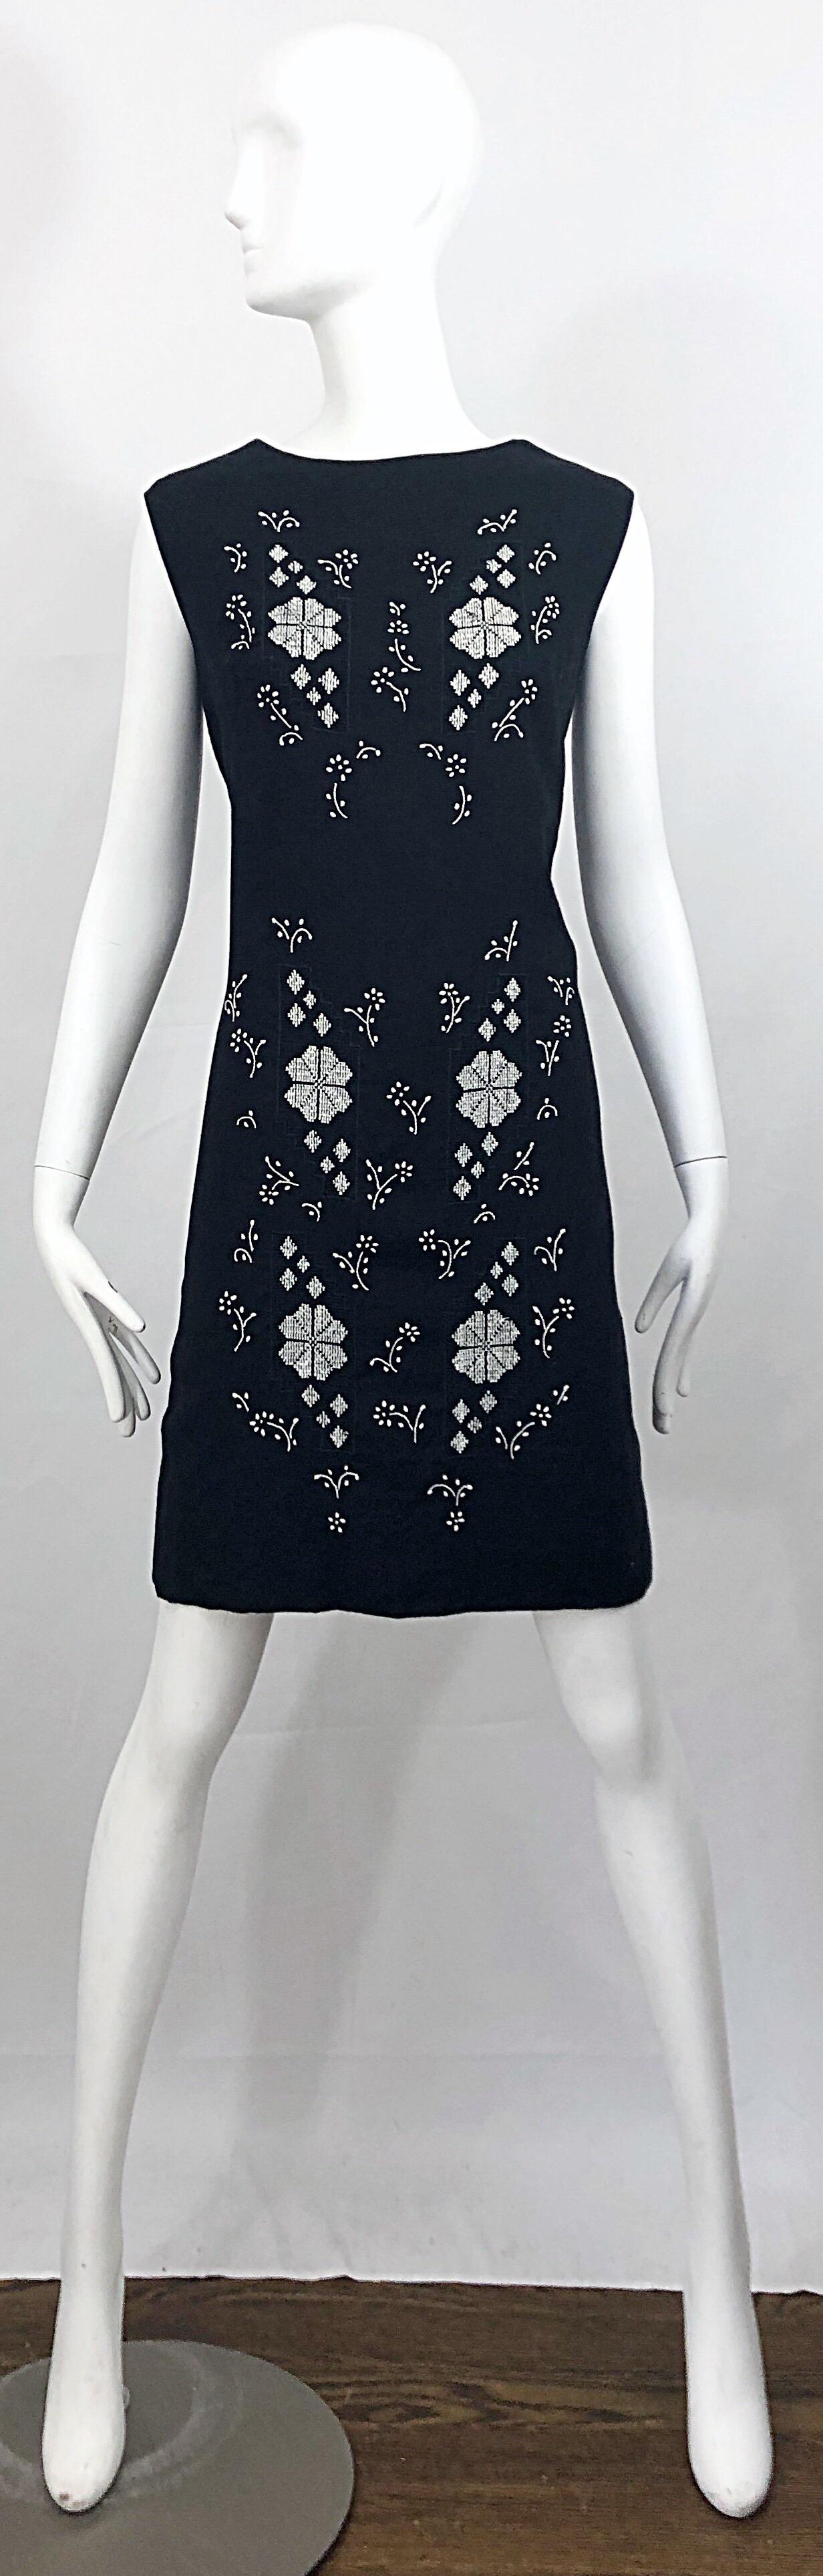 Chic vintage 60s Puerto Rican black and white embroidered linen shift dress! Features a luxurious erinore Irish linen, which is listed on the label as crease resisting Irish linen. So, this is a great dress to pack! Tailored silhouette with a